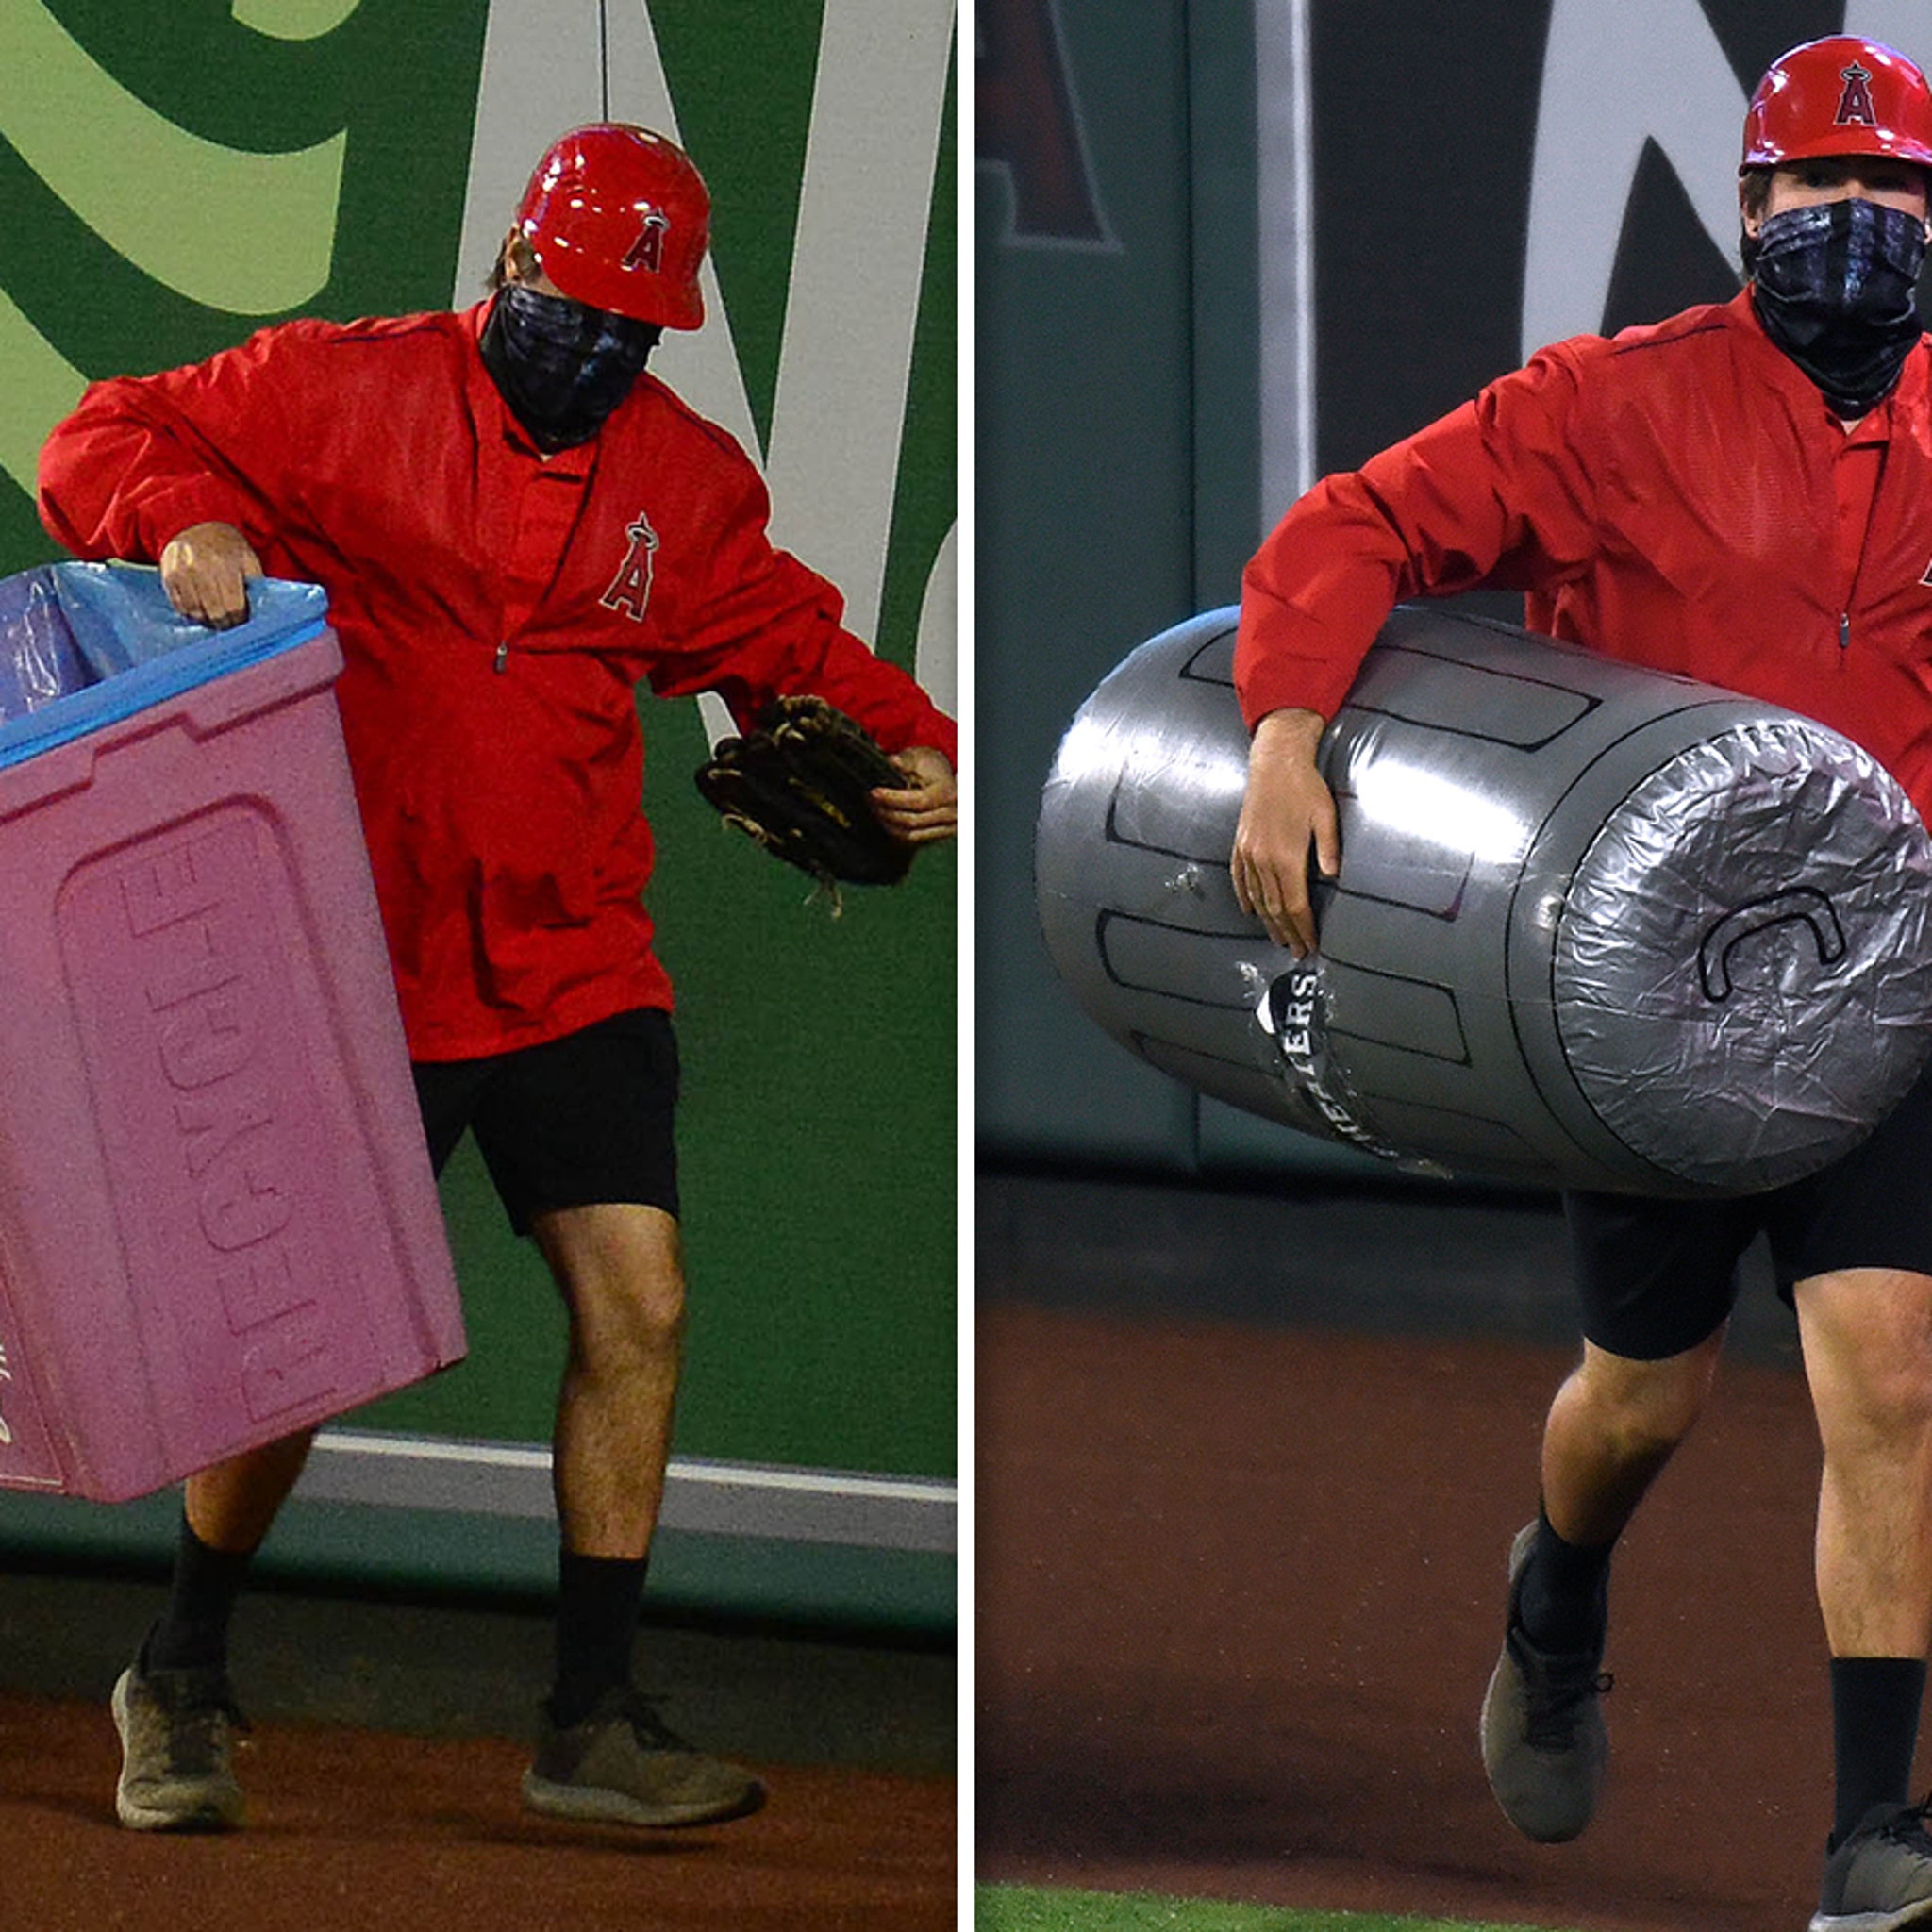 Angels Fans Troll Astros With Barrage Of Trash Cans & 'Astros Suck